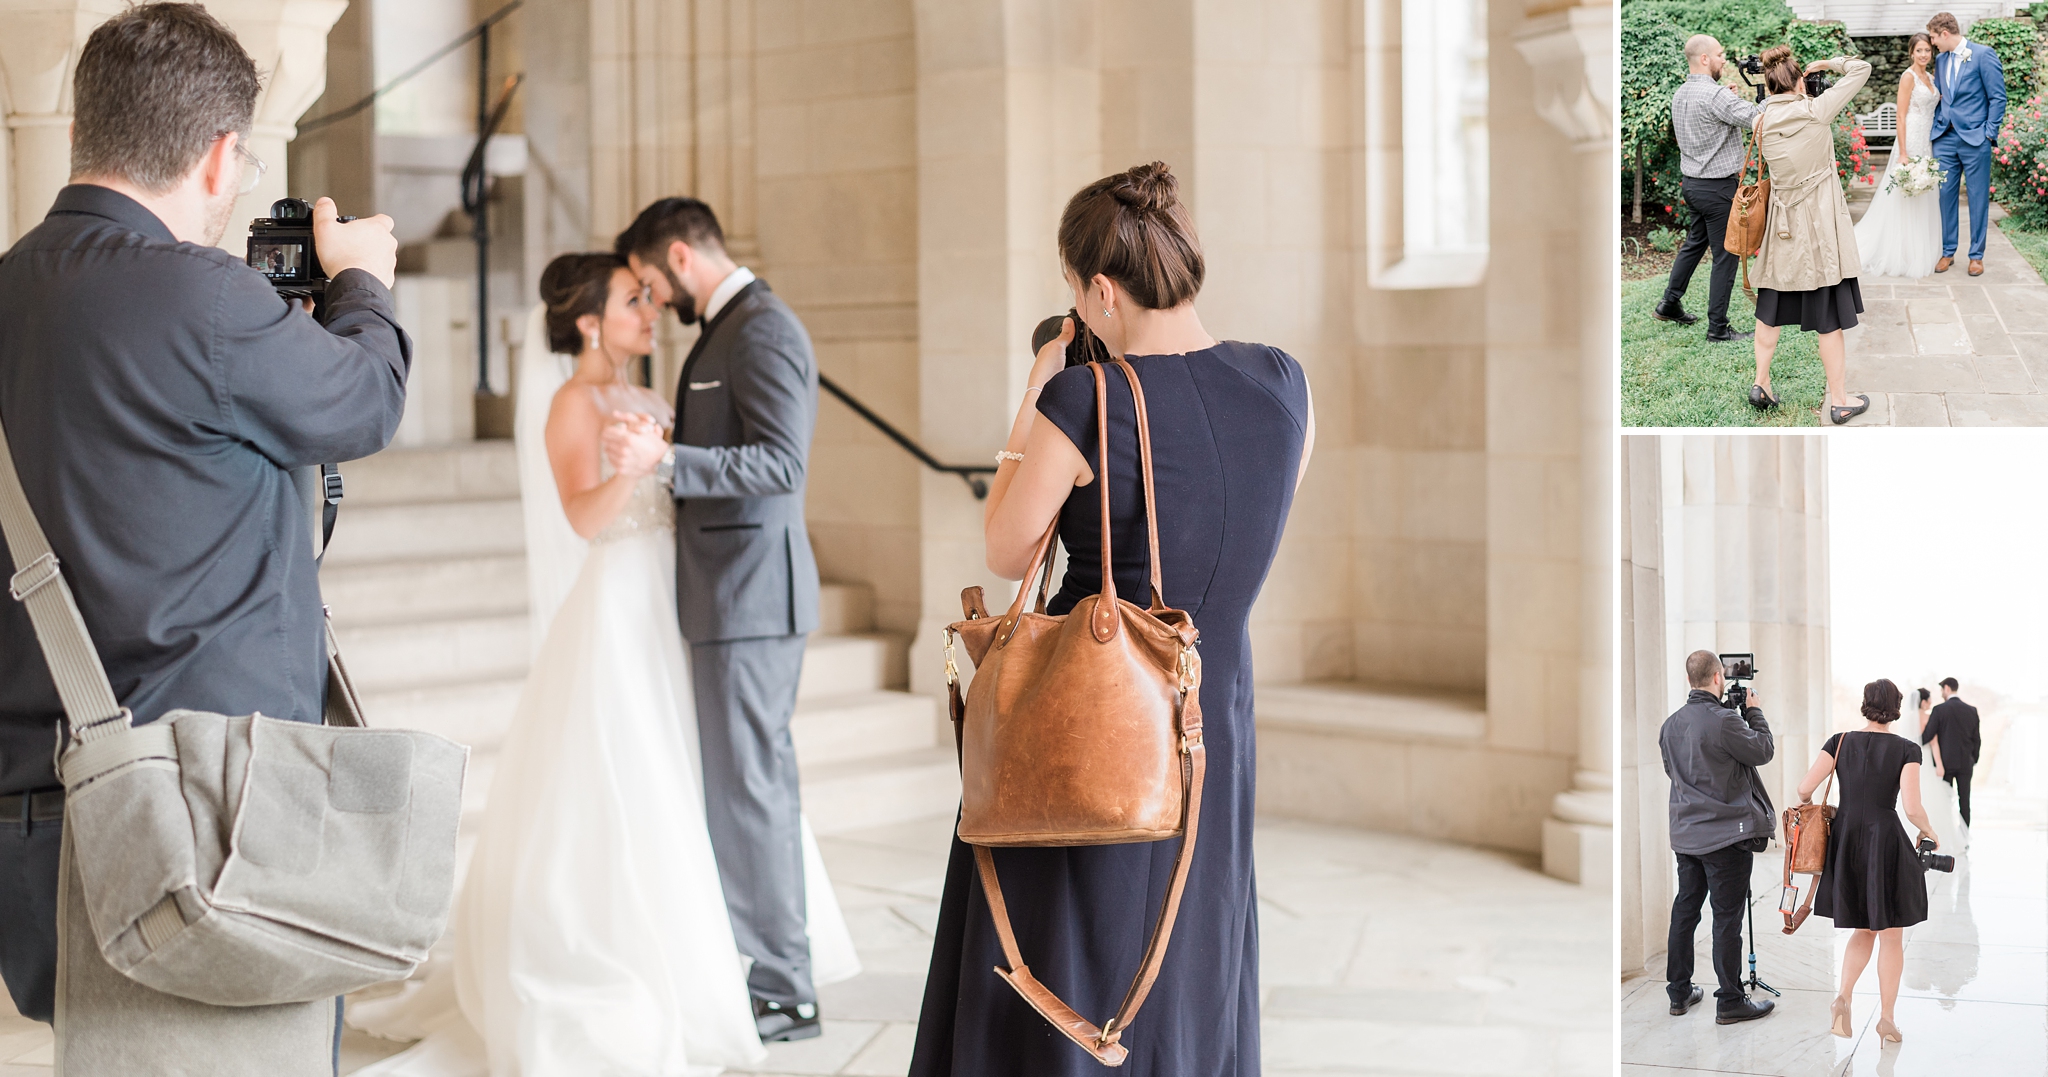 Like photography, videography is an invaluable investment! This DC wedding photographer shares why it's important to hire like-minded vendors and create a cohesive team for these two important roles!